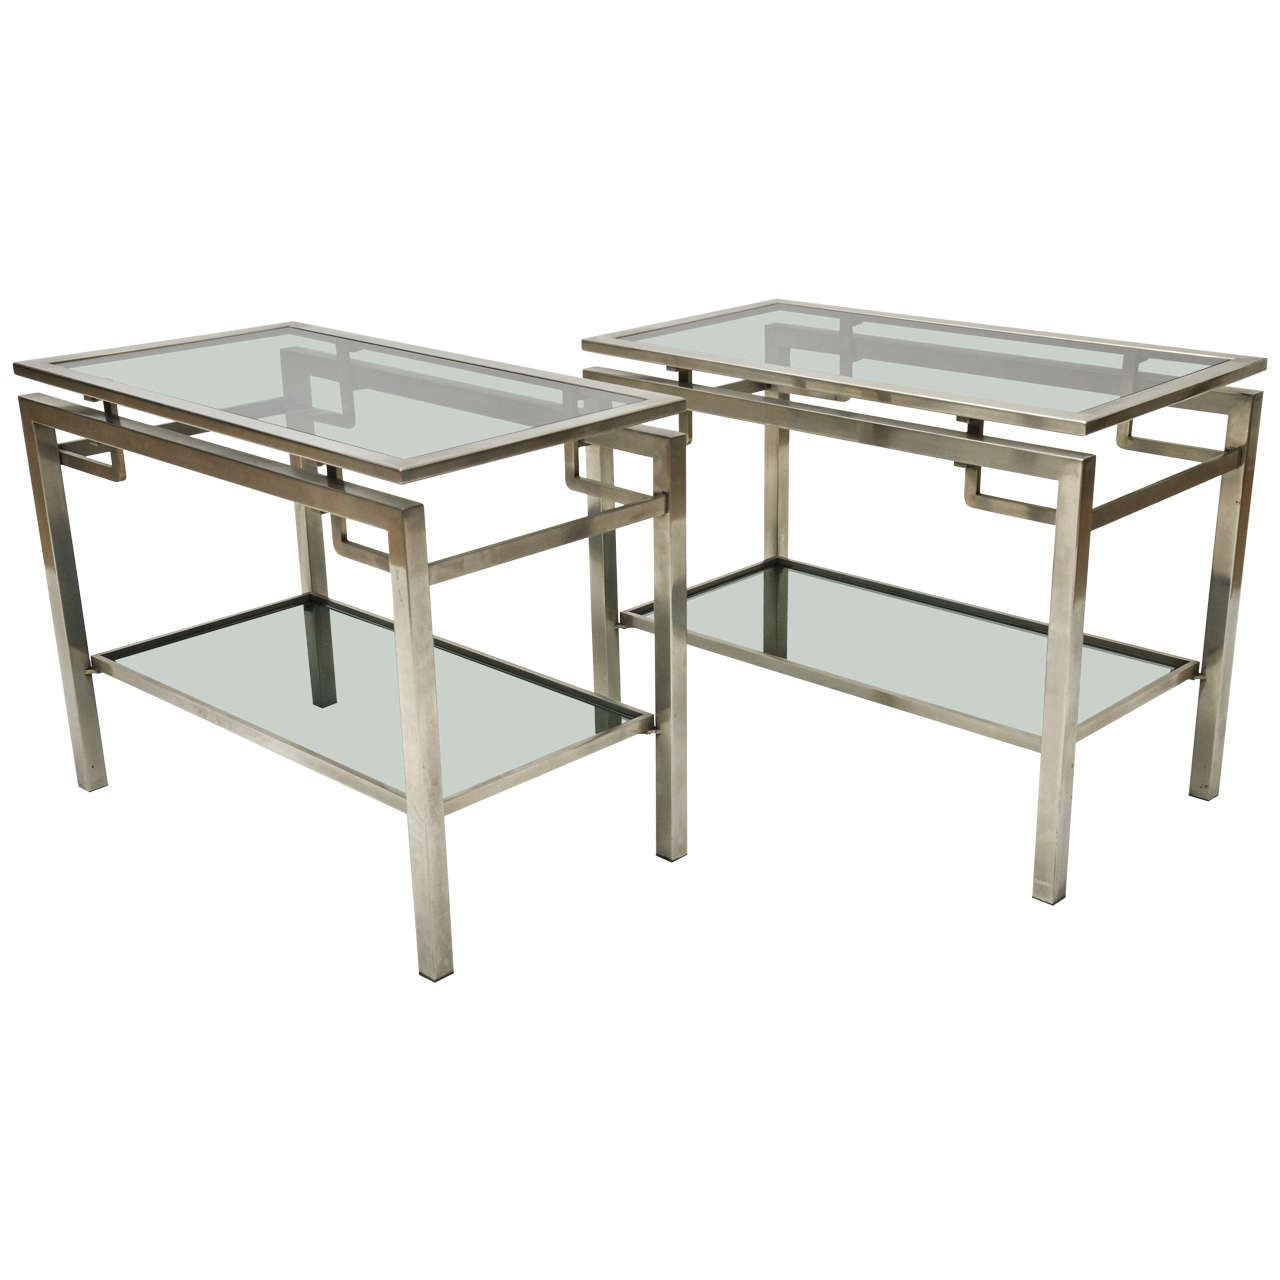 Pair of Mid-Century Modern French Guy Le Fevre Chrome Two-Tier Side Tables For Sale